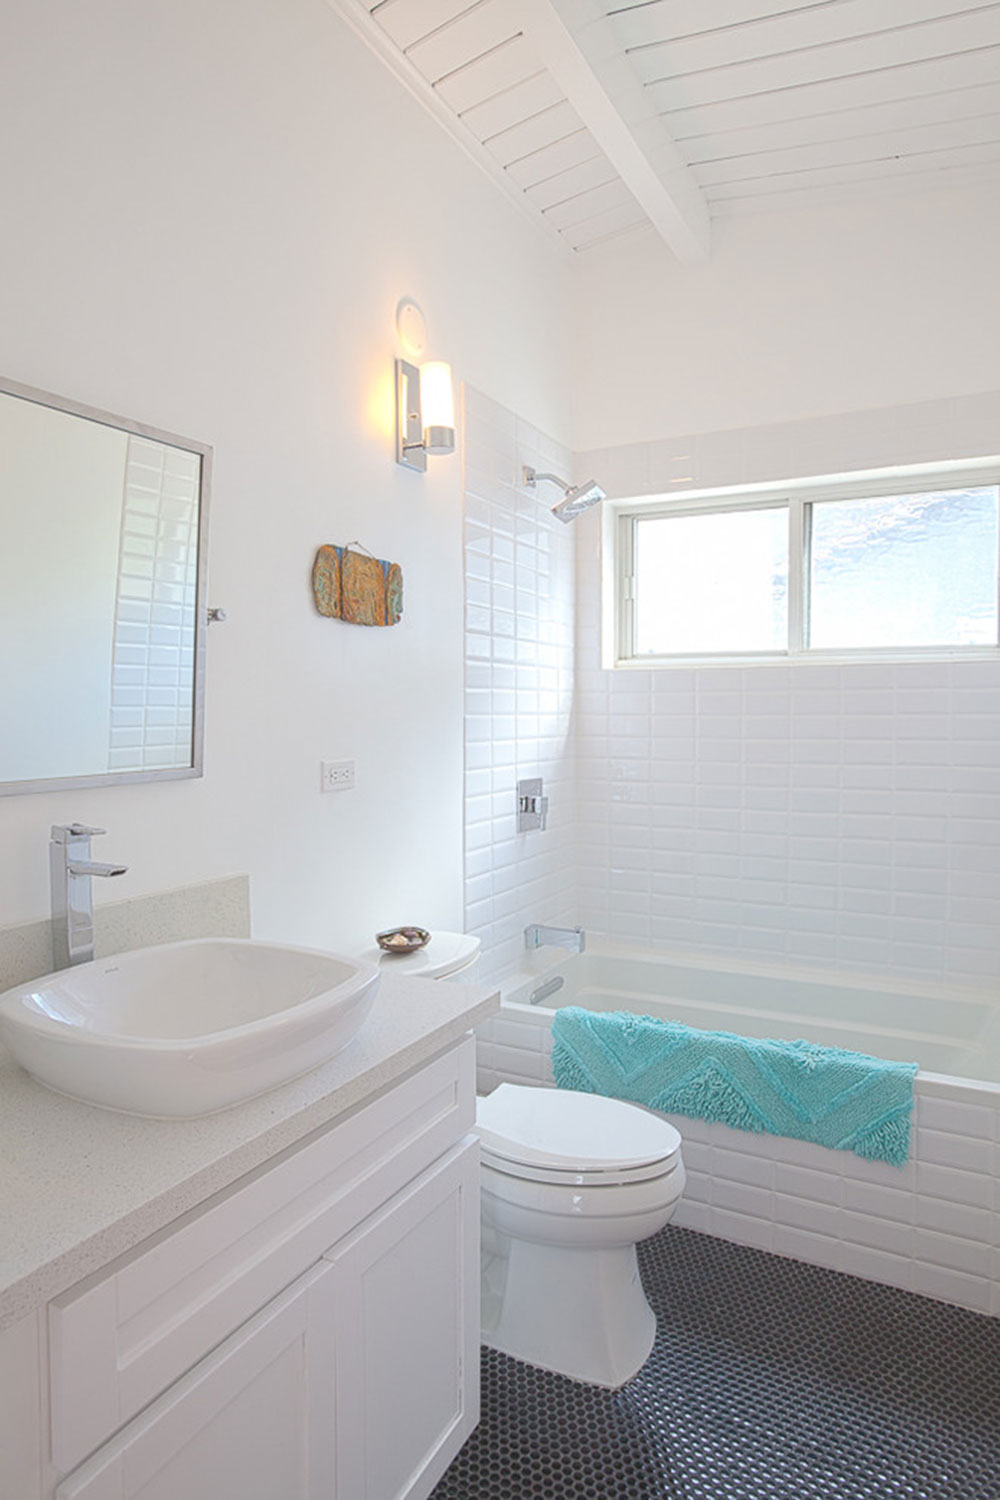 Westchester-Rehab-by-Carley-Montgomery The definitive guide on how to decorate a bathroom